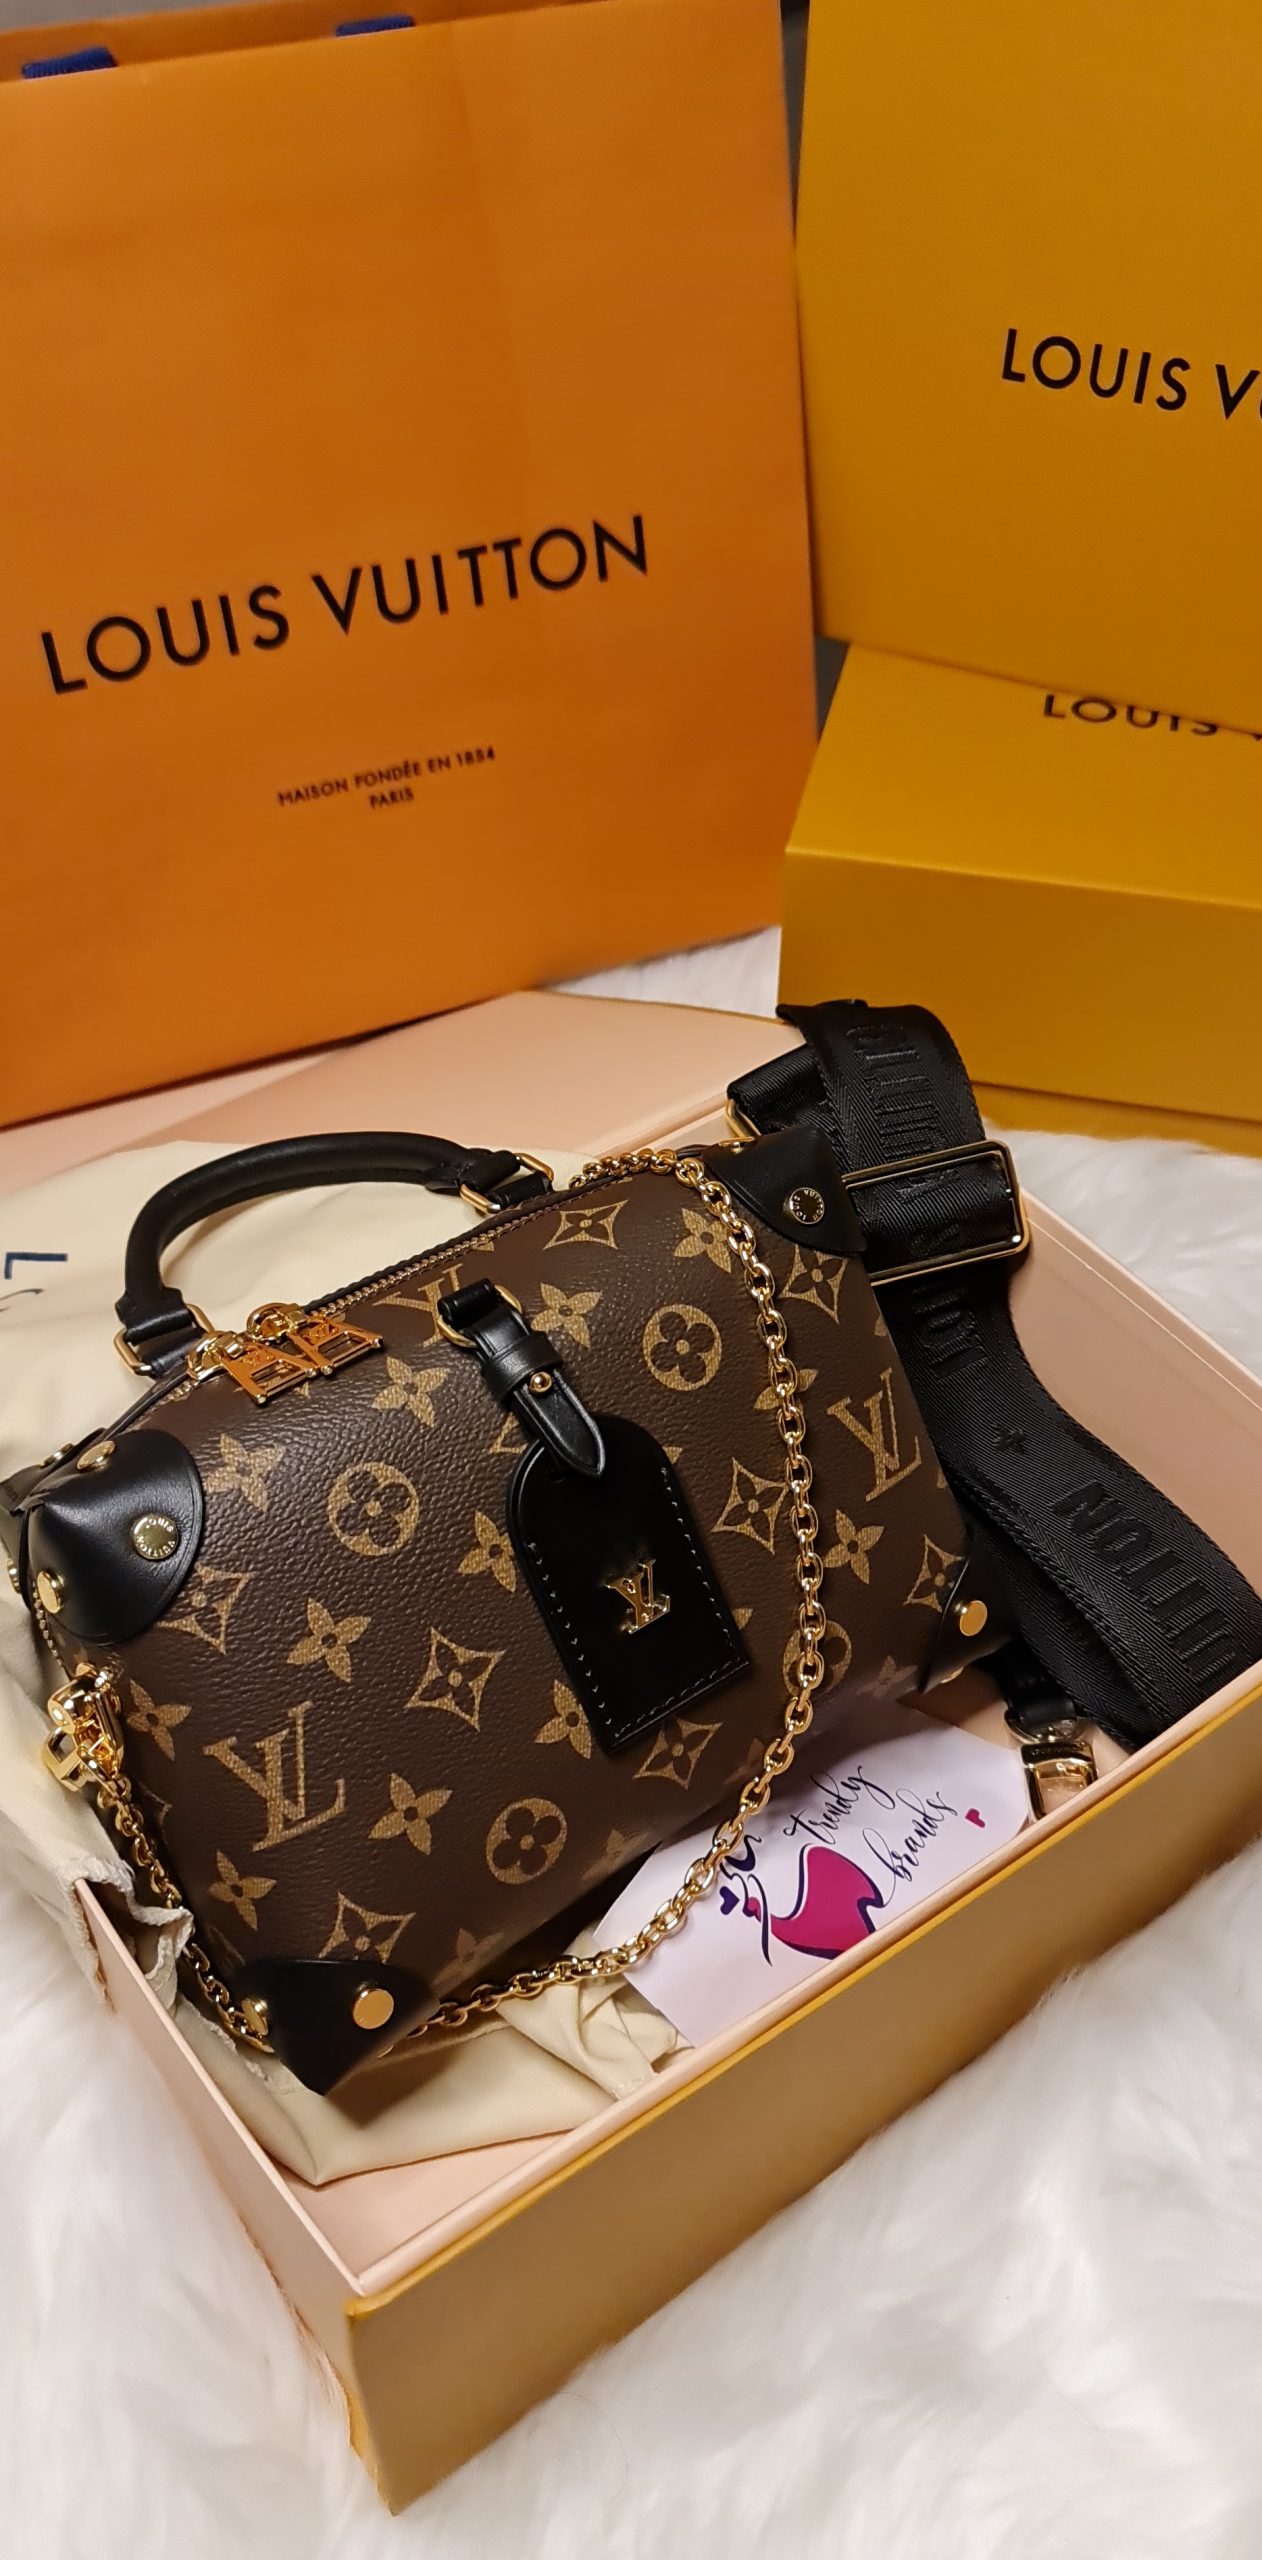 Louis Vuitton Petite Malle Bags for Sale in Brooklyn, NY - OfferUp